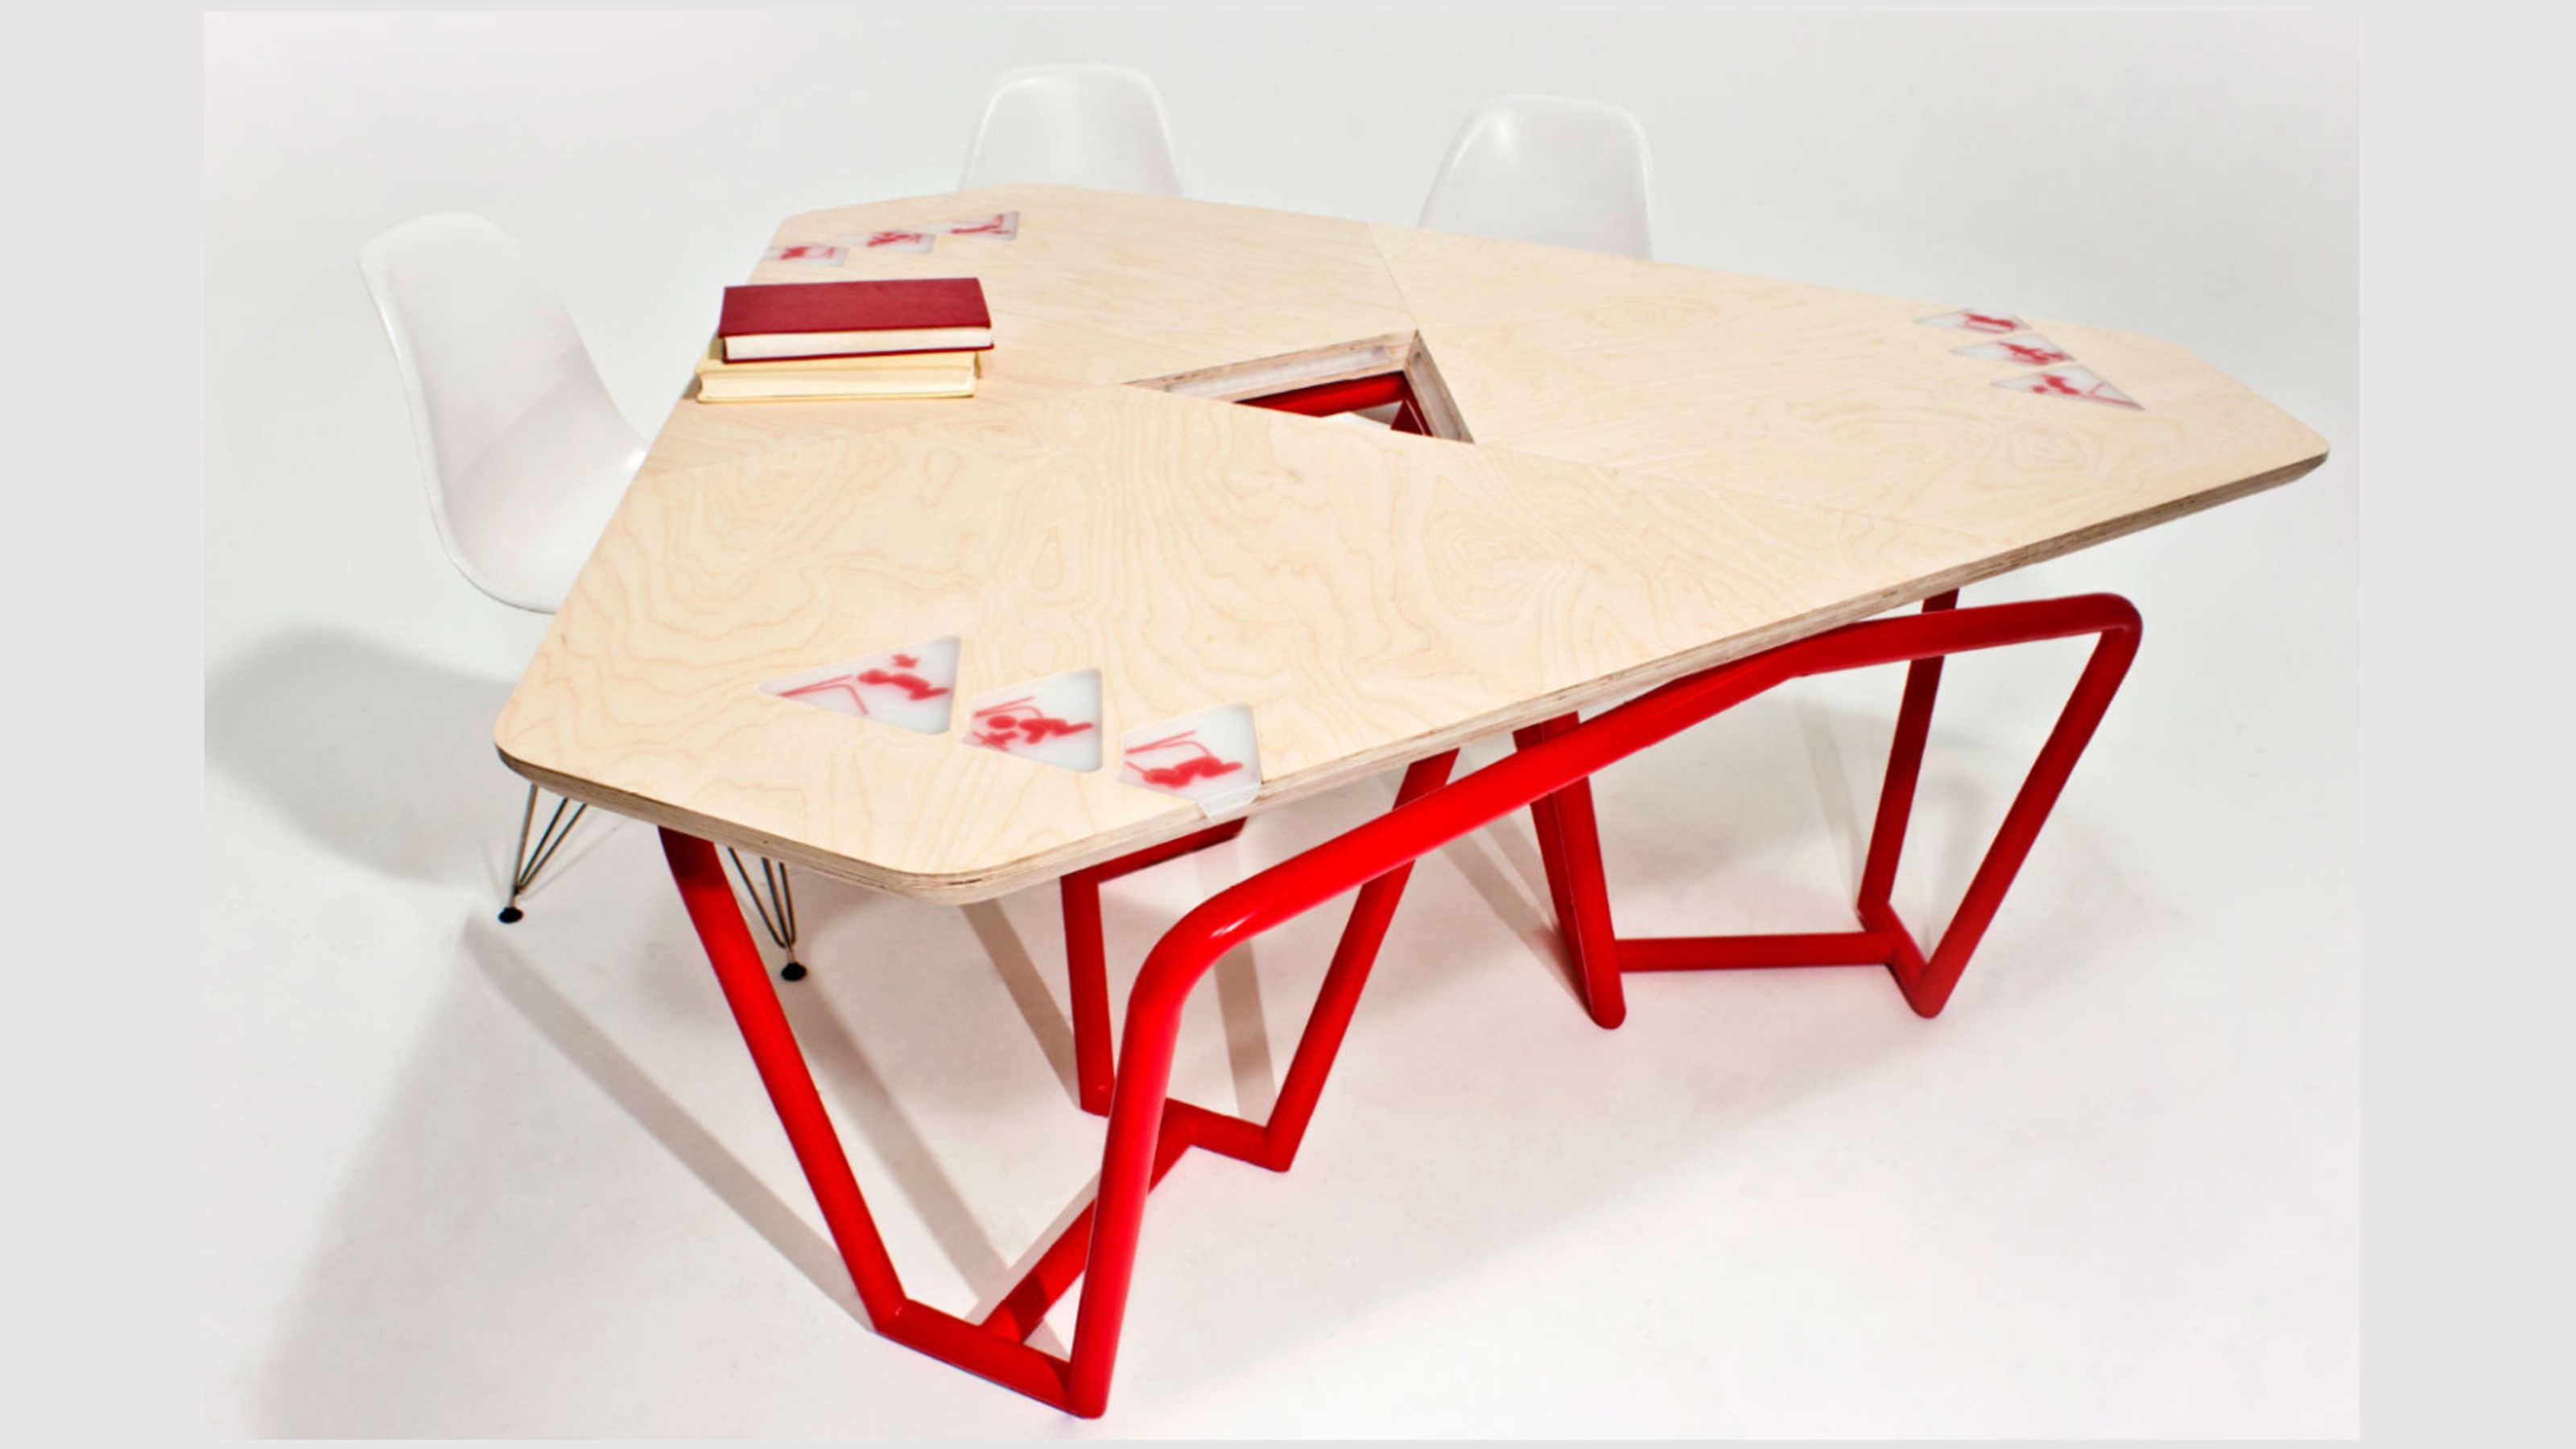 Earthquake resilient table